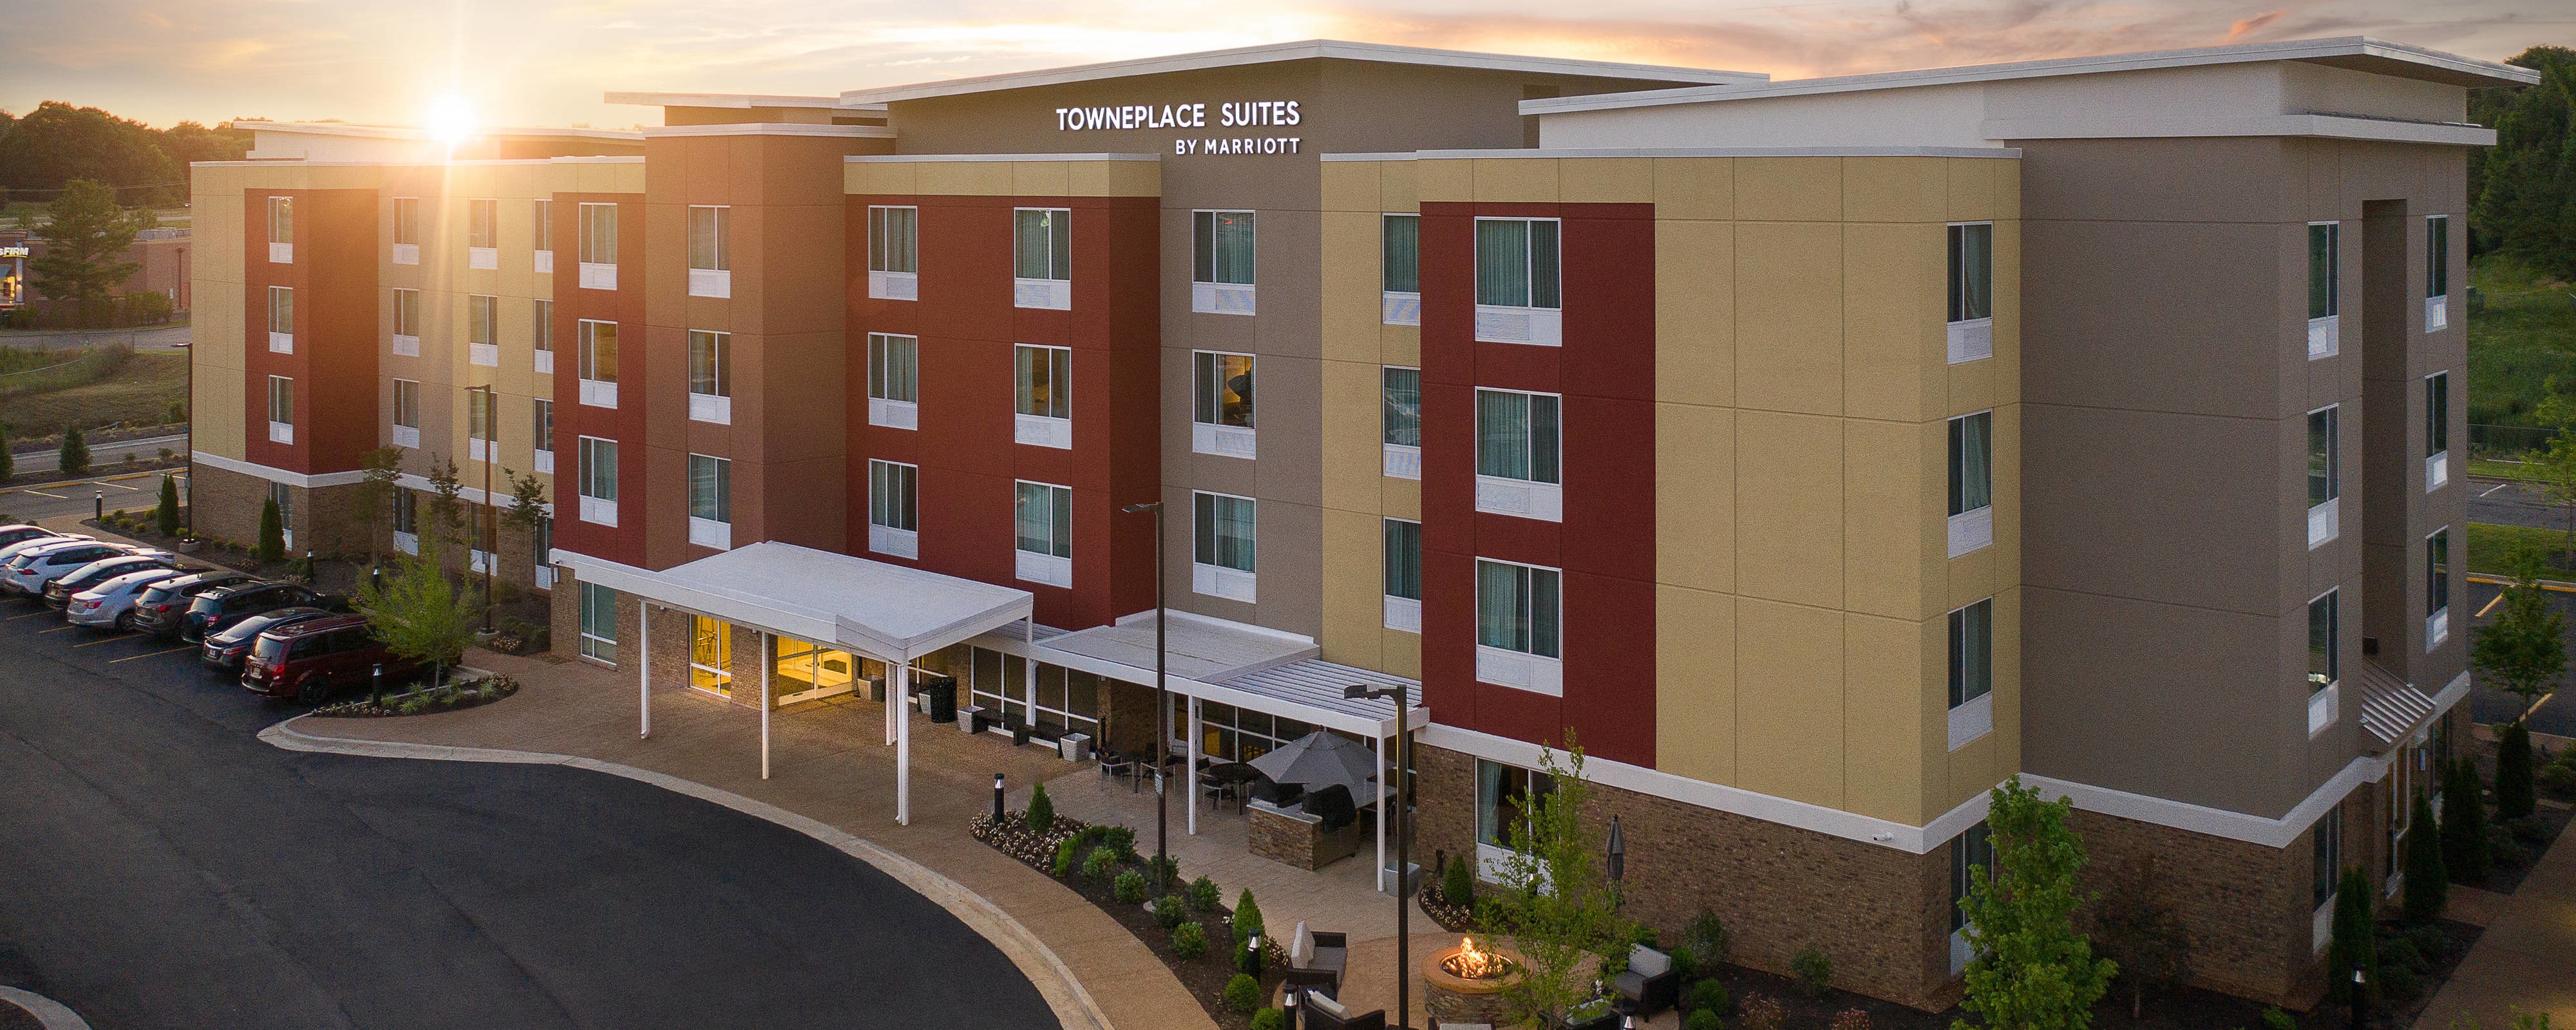 TownePlace Suites by Marriott Memphis Olive Branch image